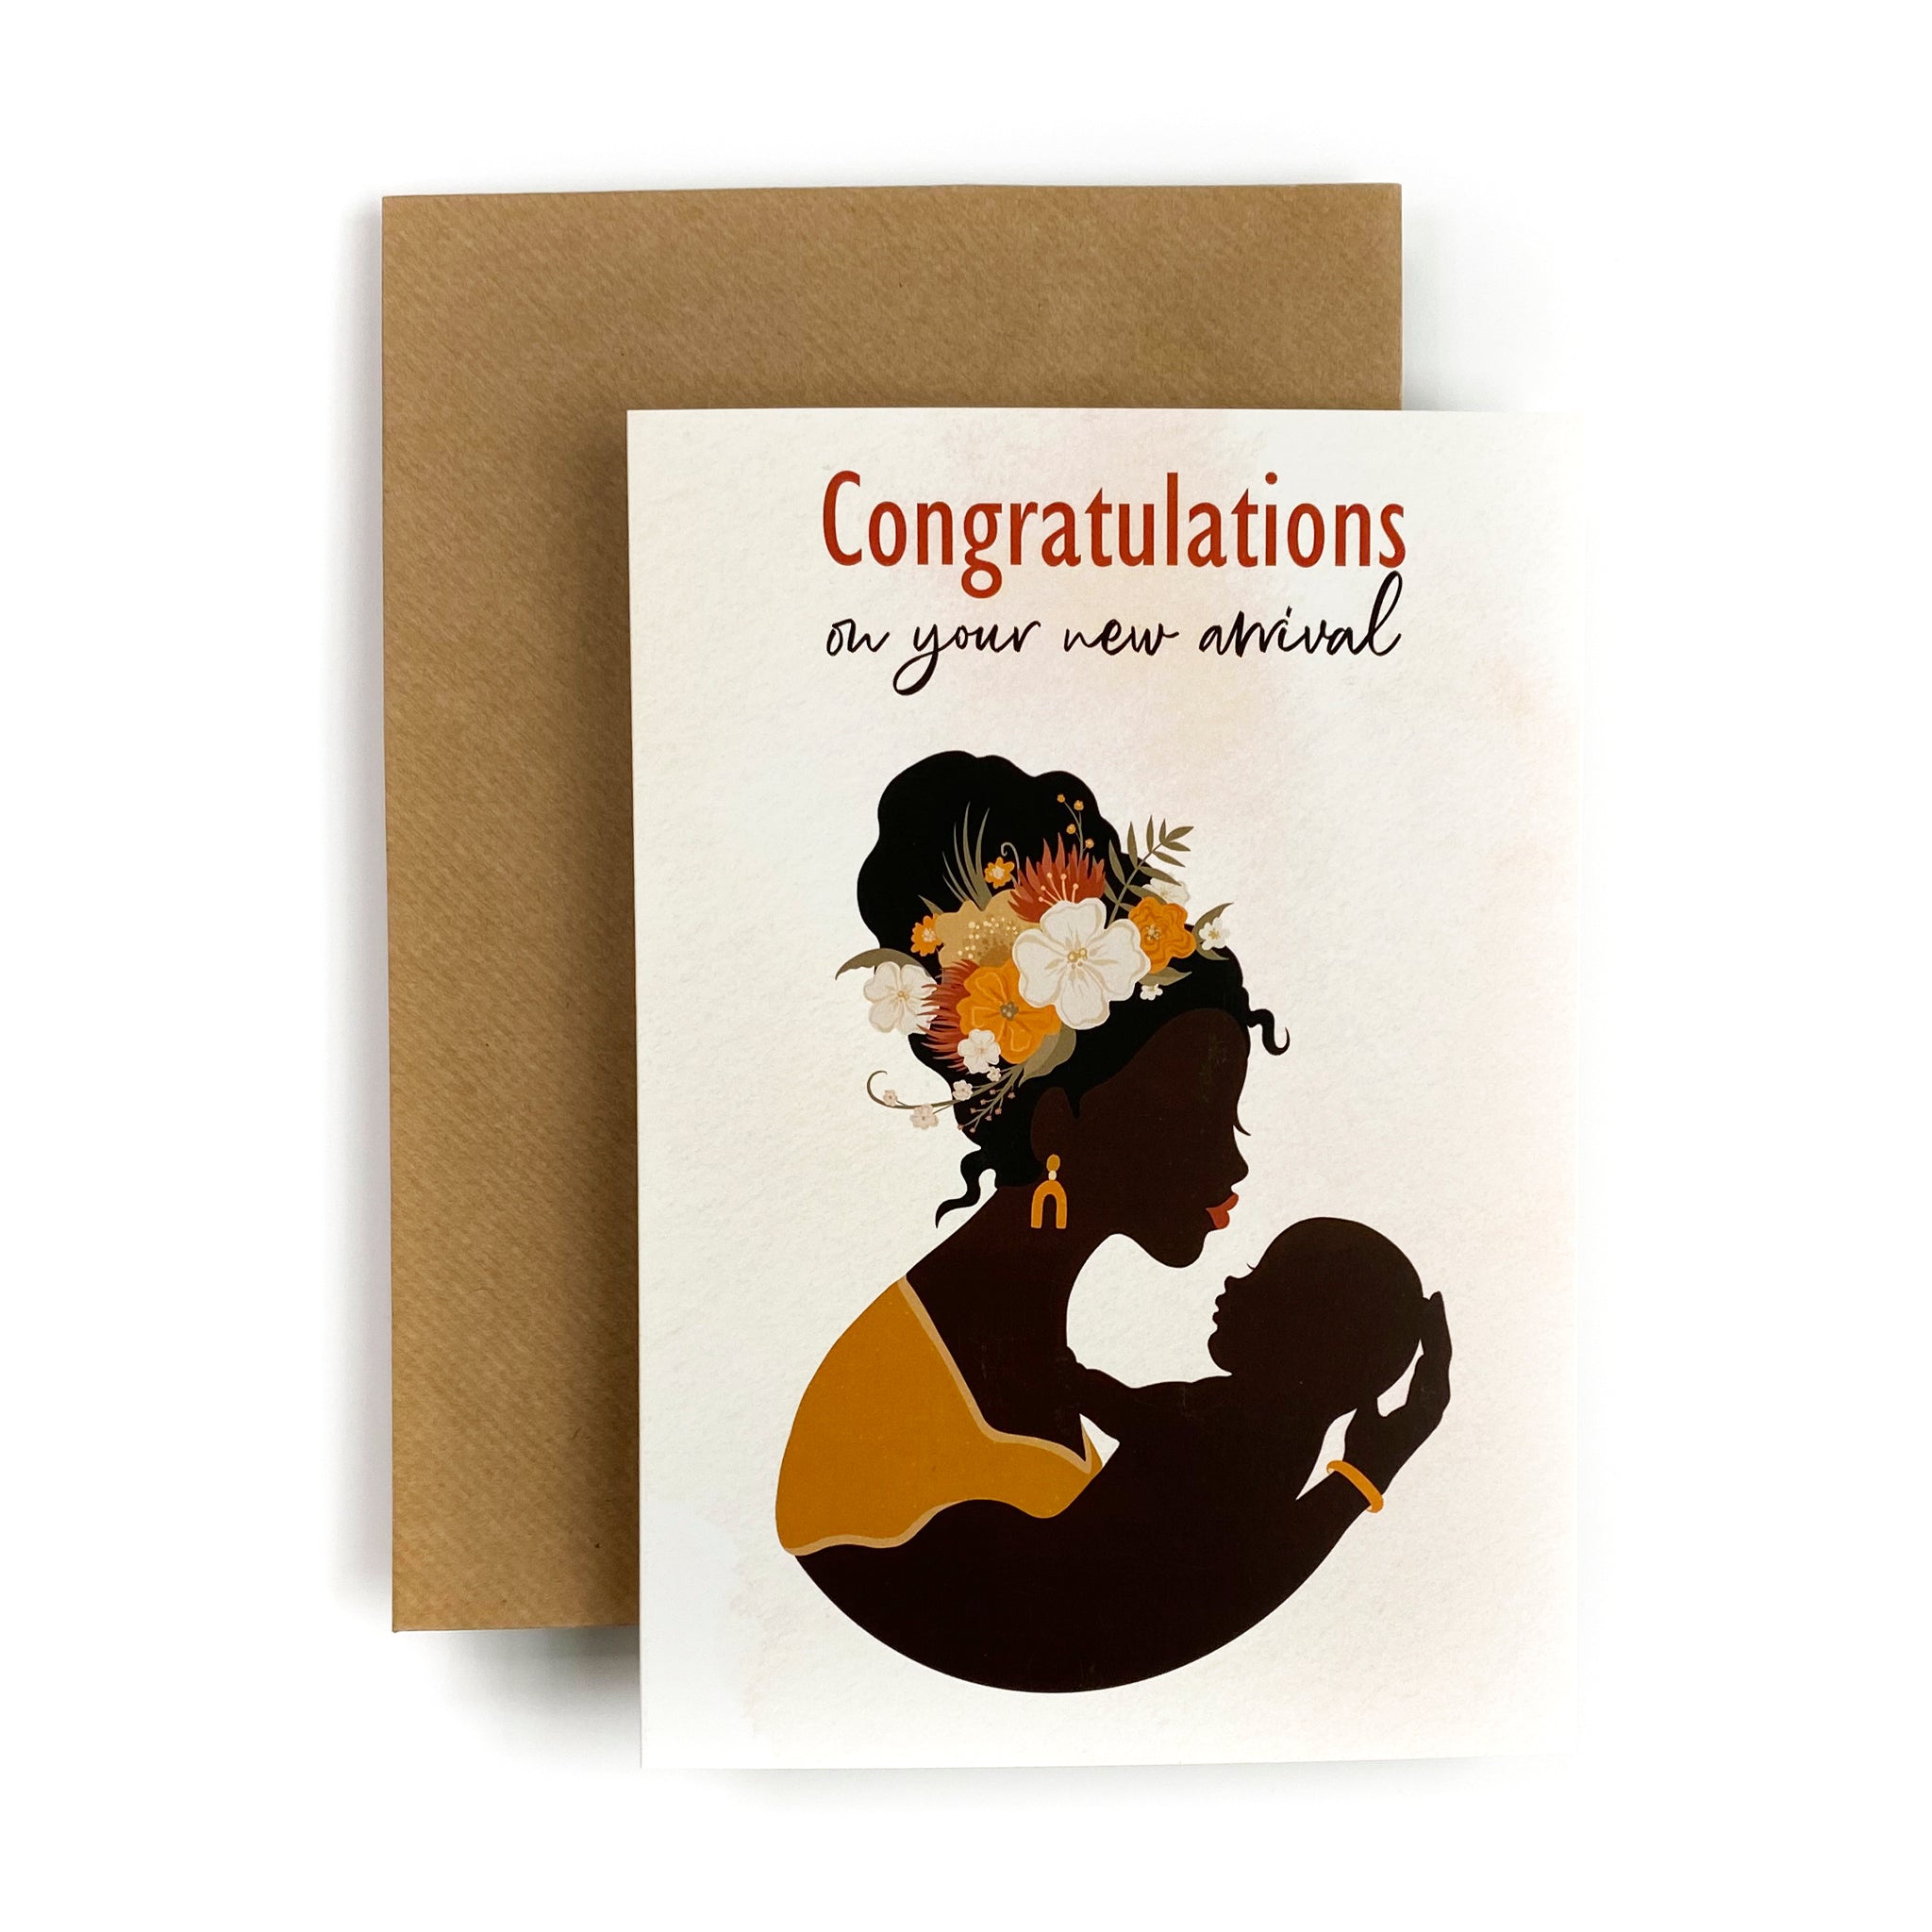 New Baby Congratulations / New arrival card